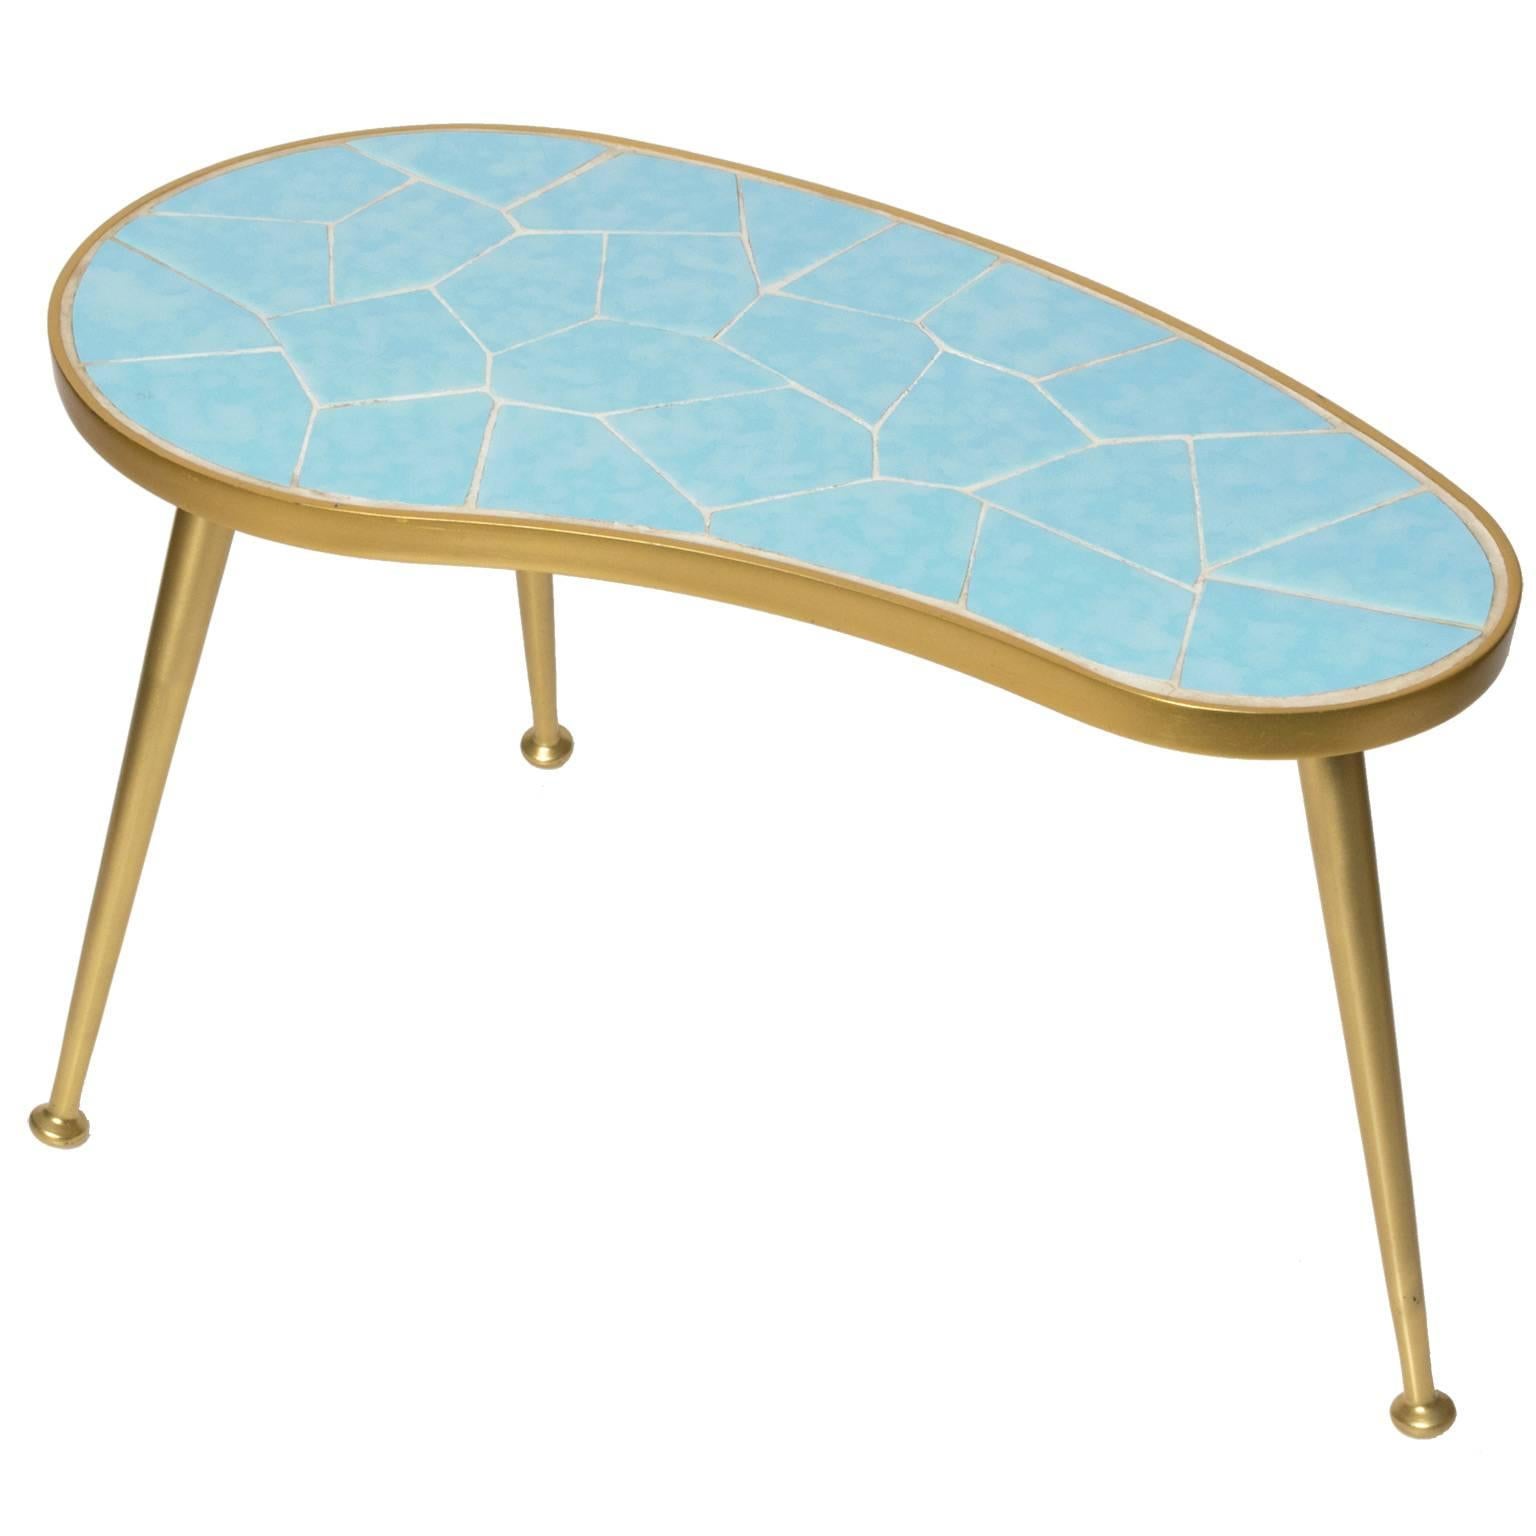 Small Kidney Shaped Tiled Occasional Table with Three Legs